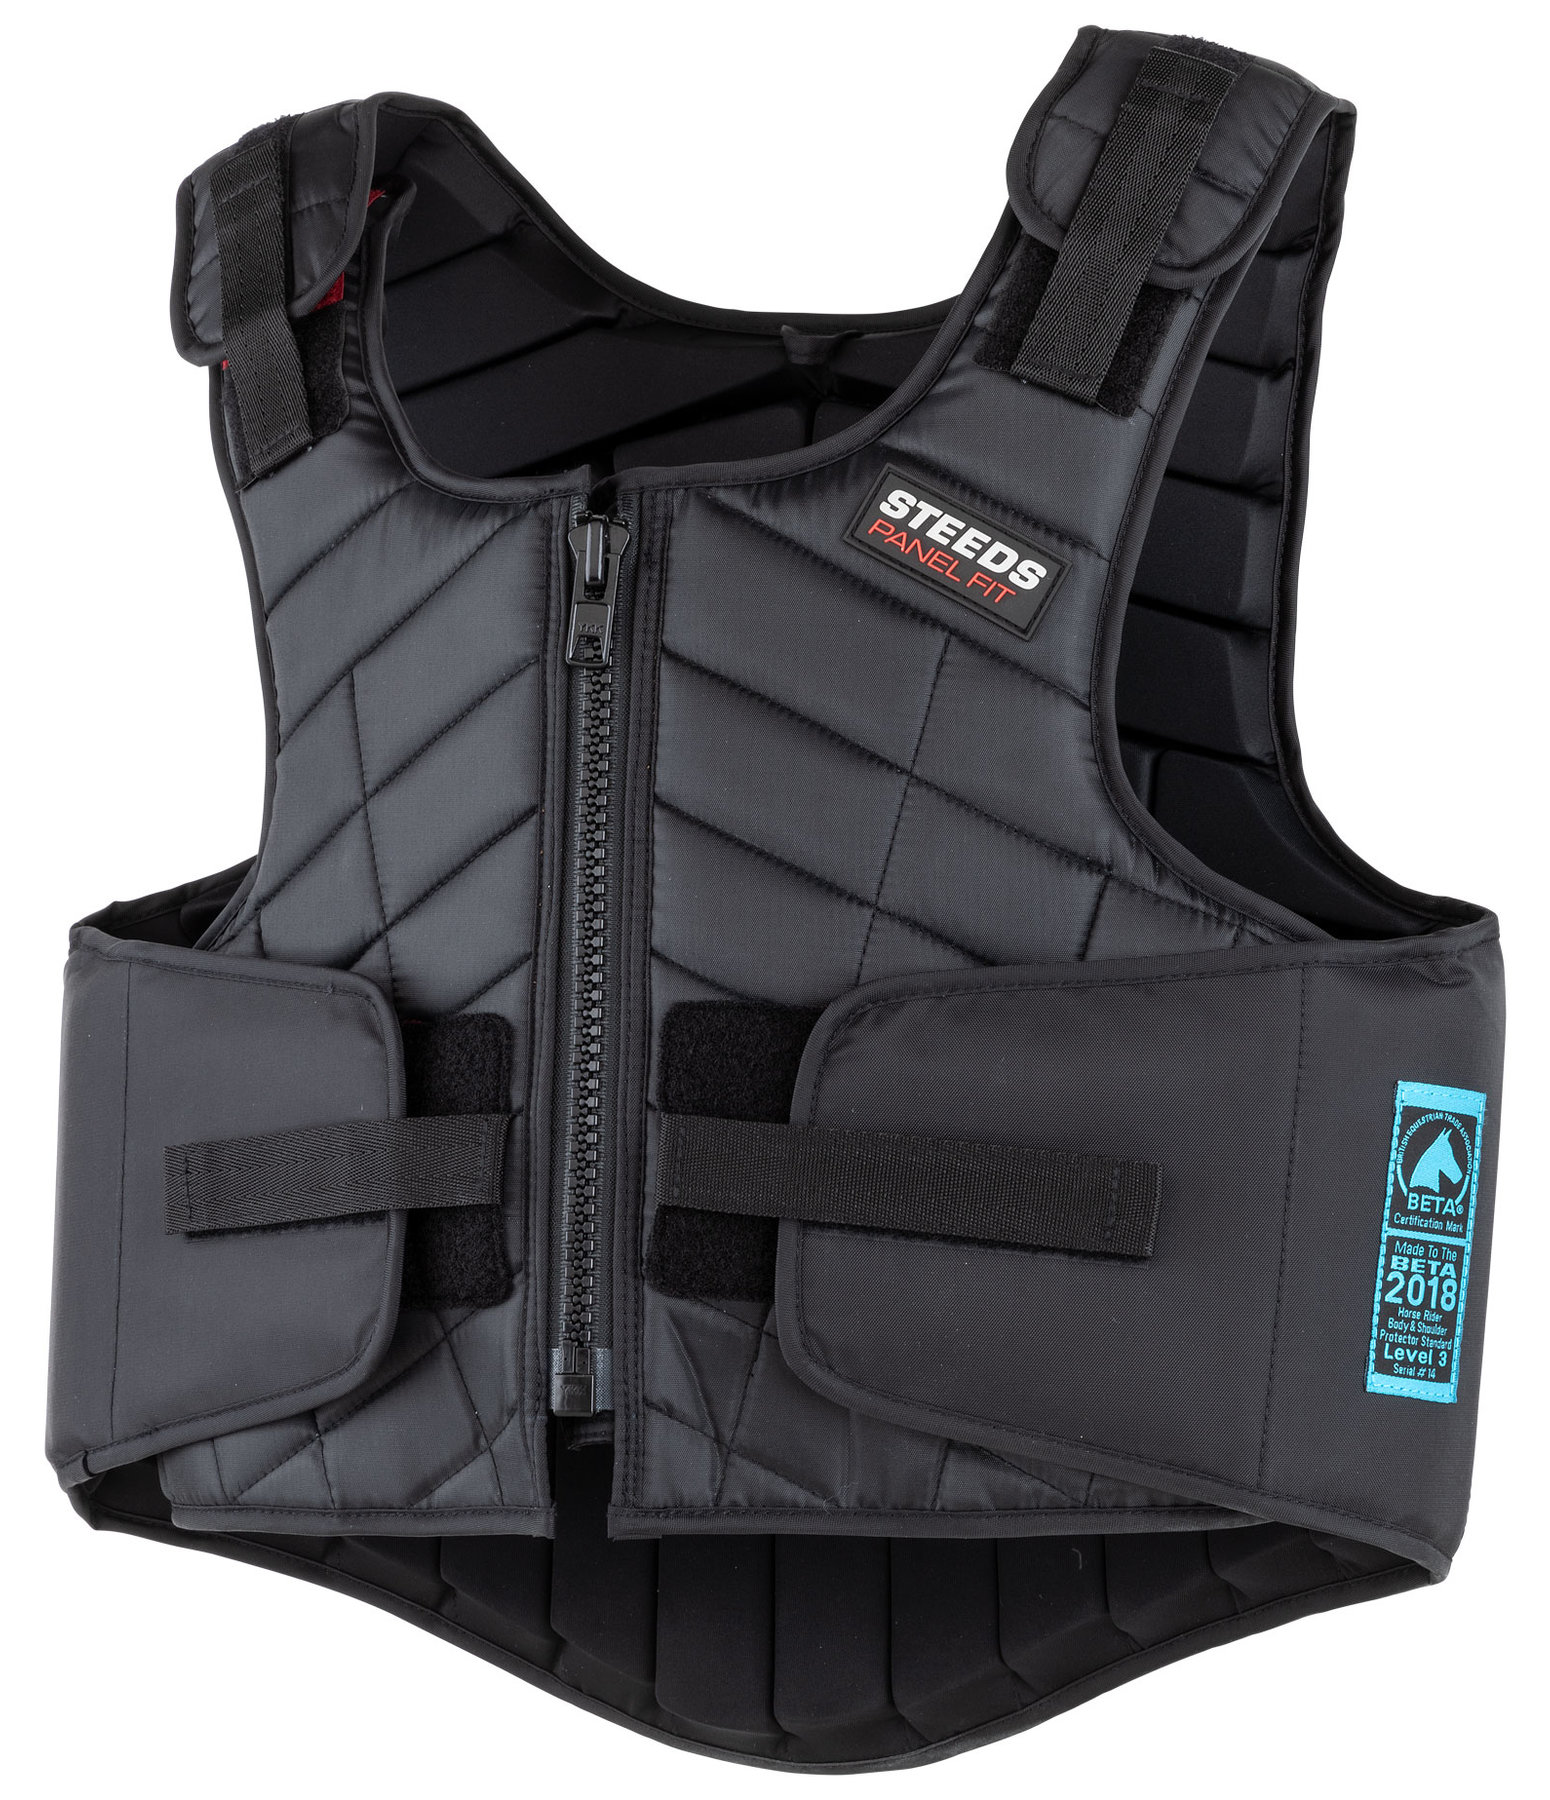 bodyprotector Panel Fit